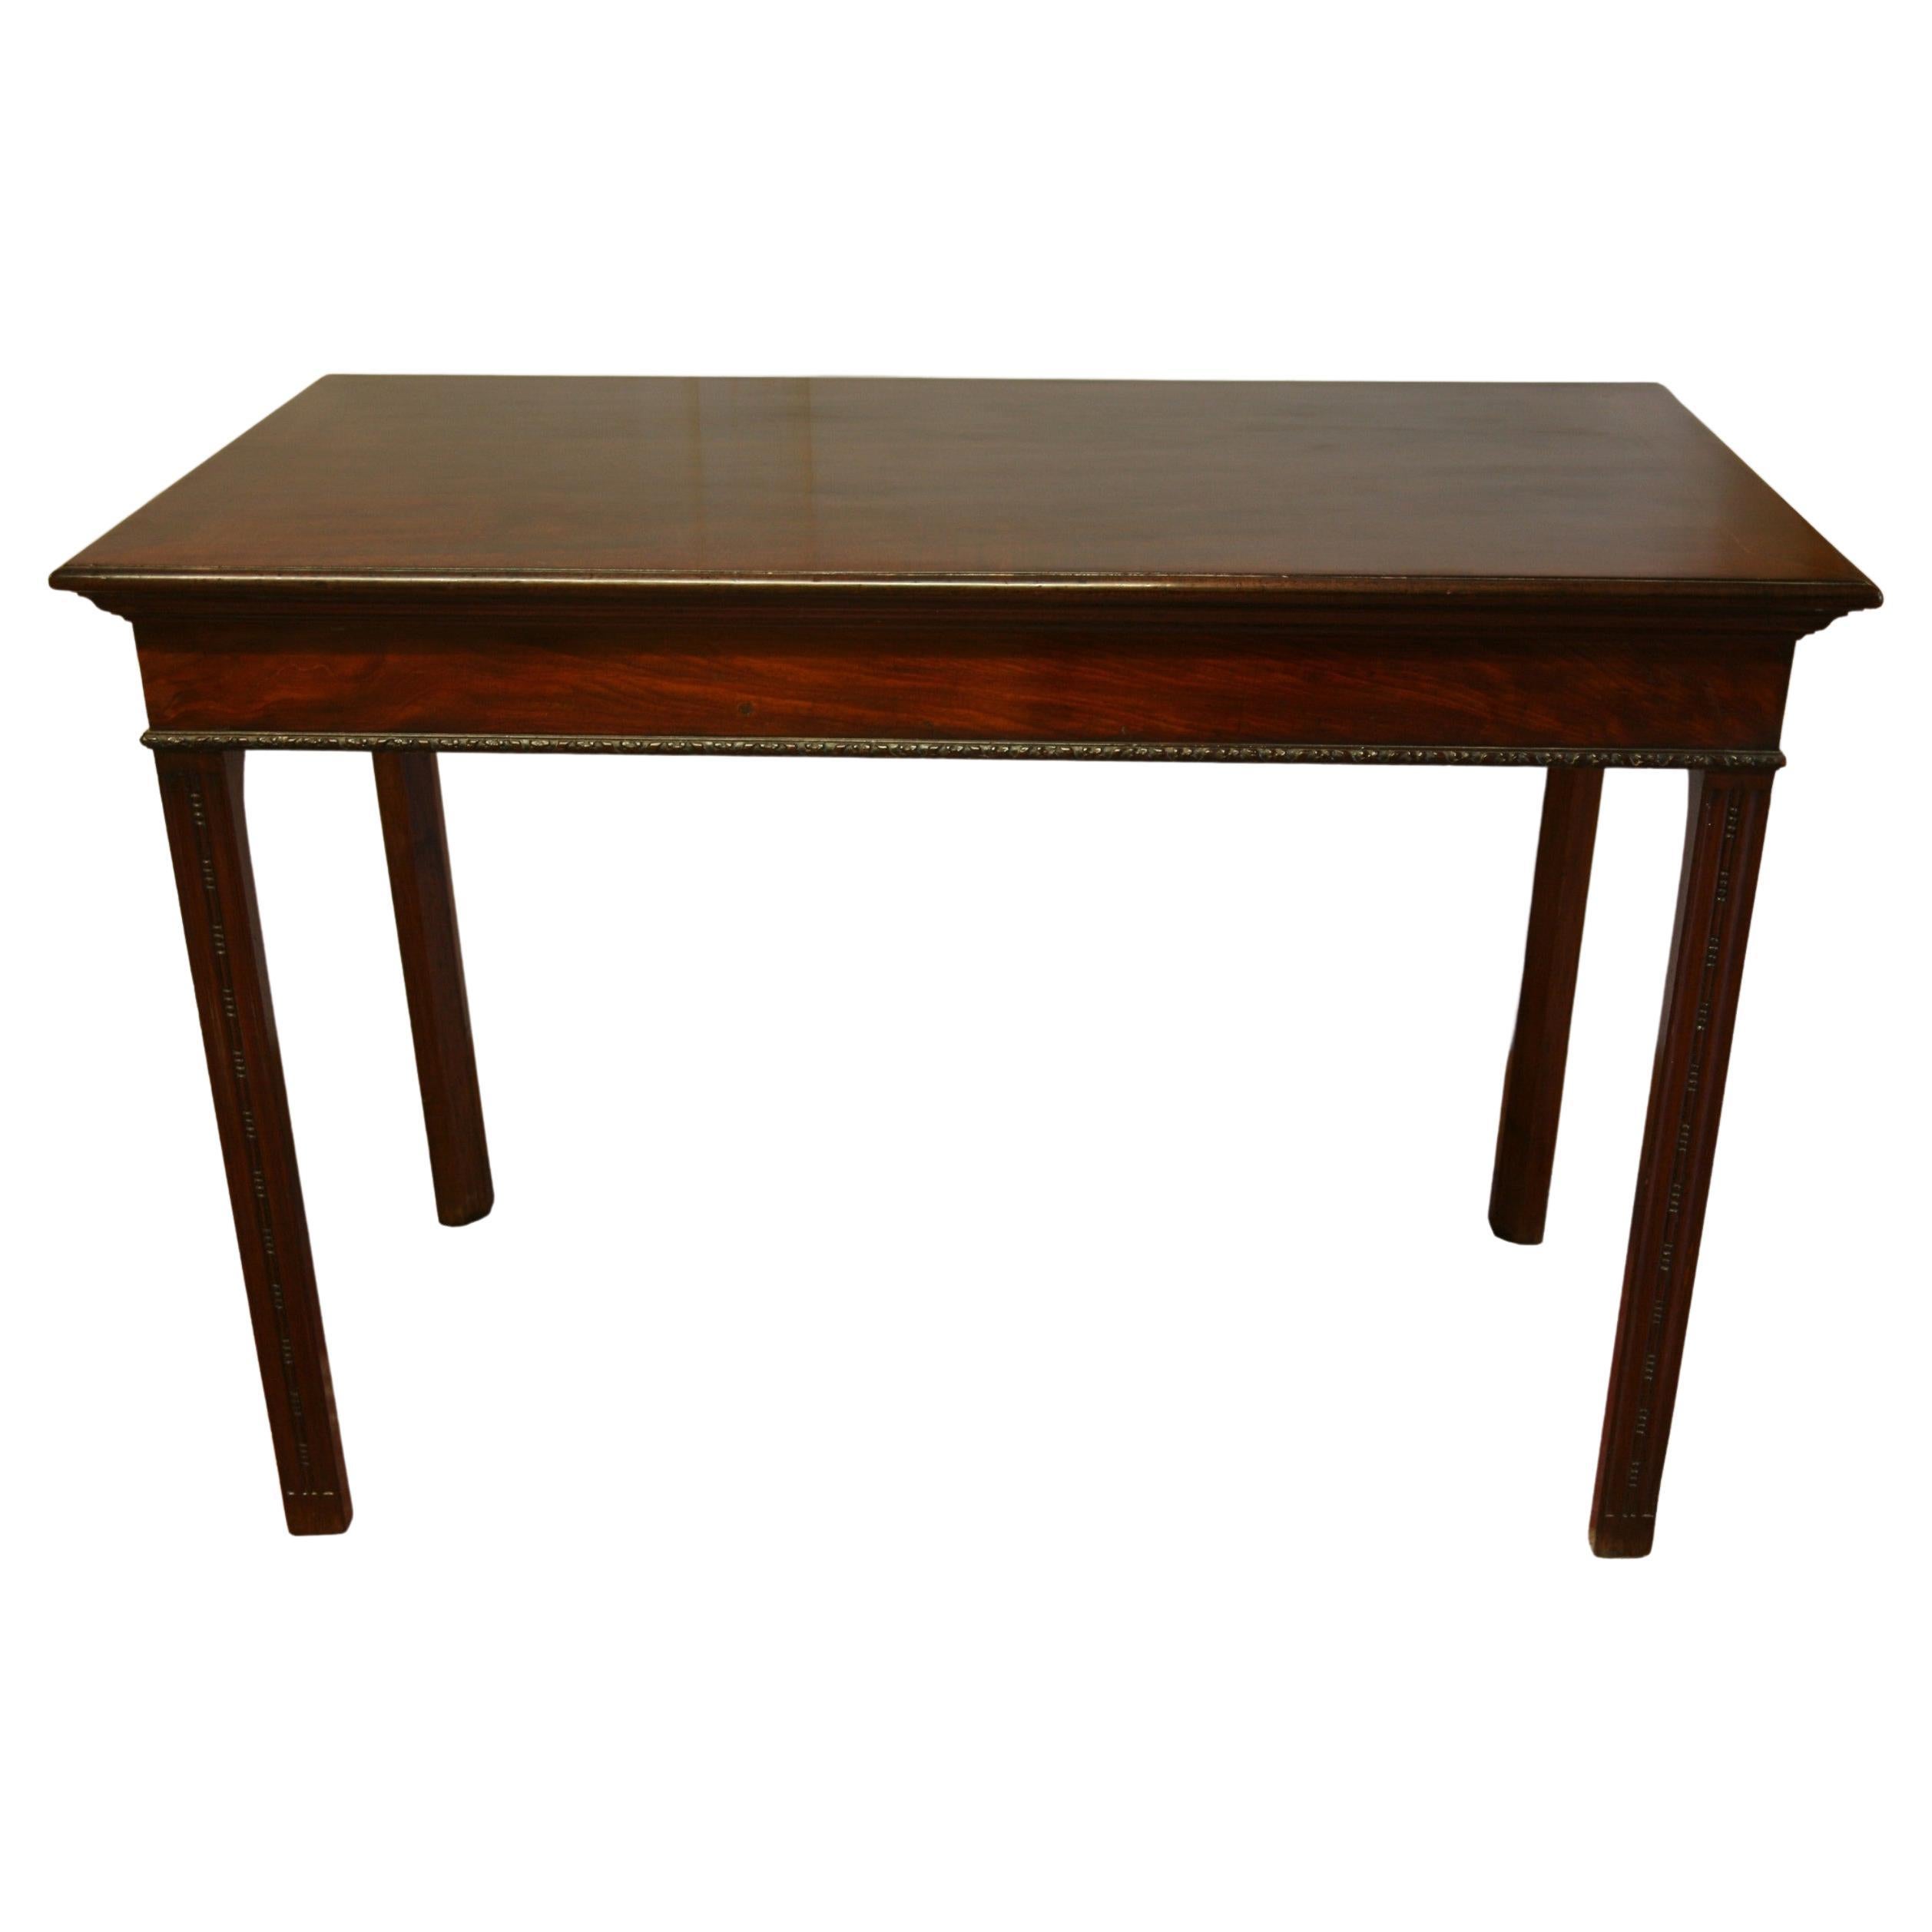 Fine Georgian Mahogany Cyhippendale Side or Serving Tanle with Superb Legs For Sale